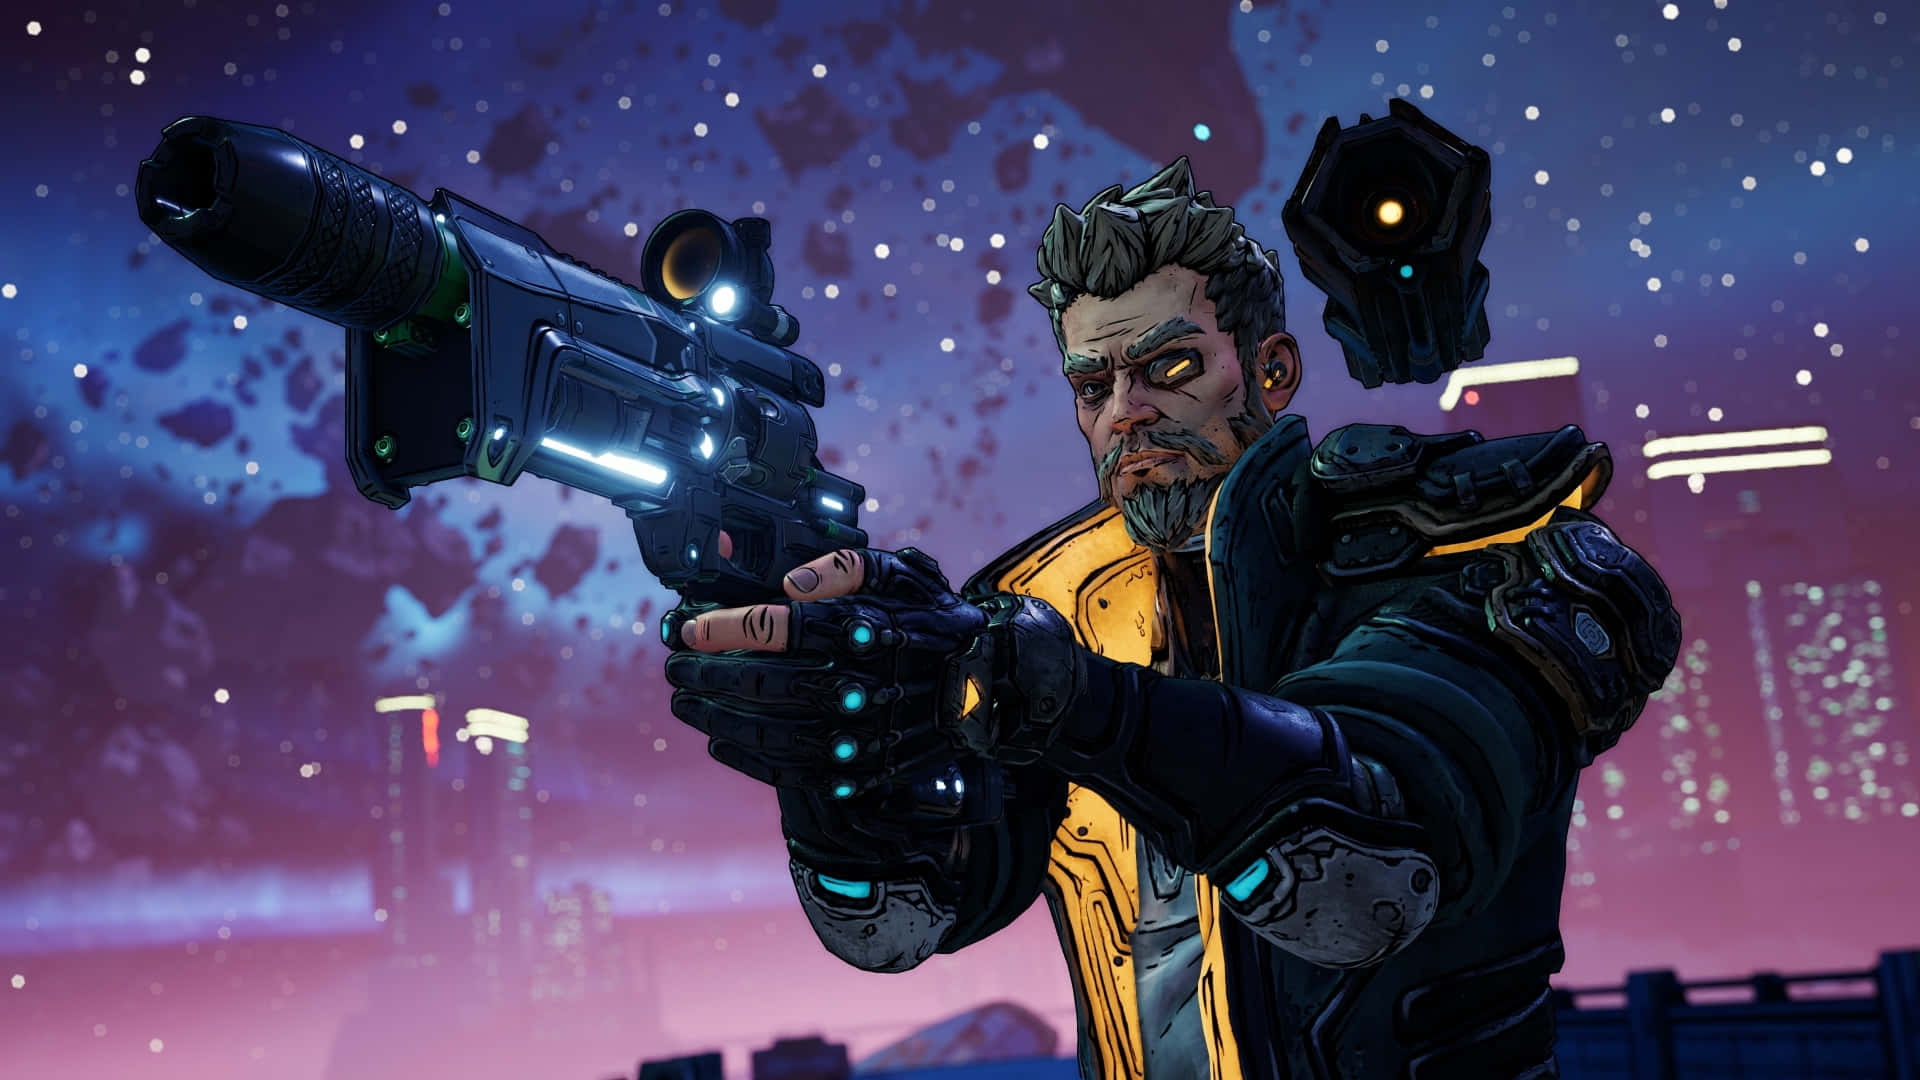 "Experience the Action-Packed Adventure of Borderlands 3!"